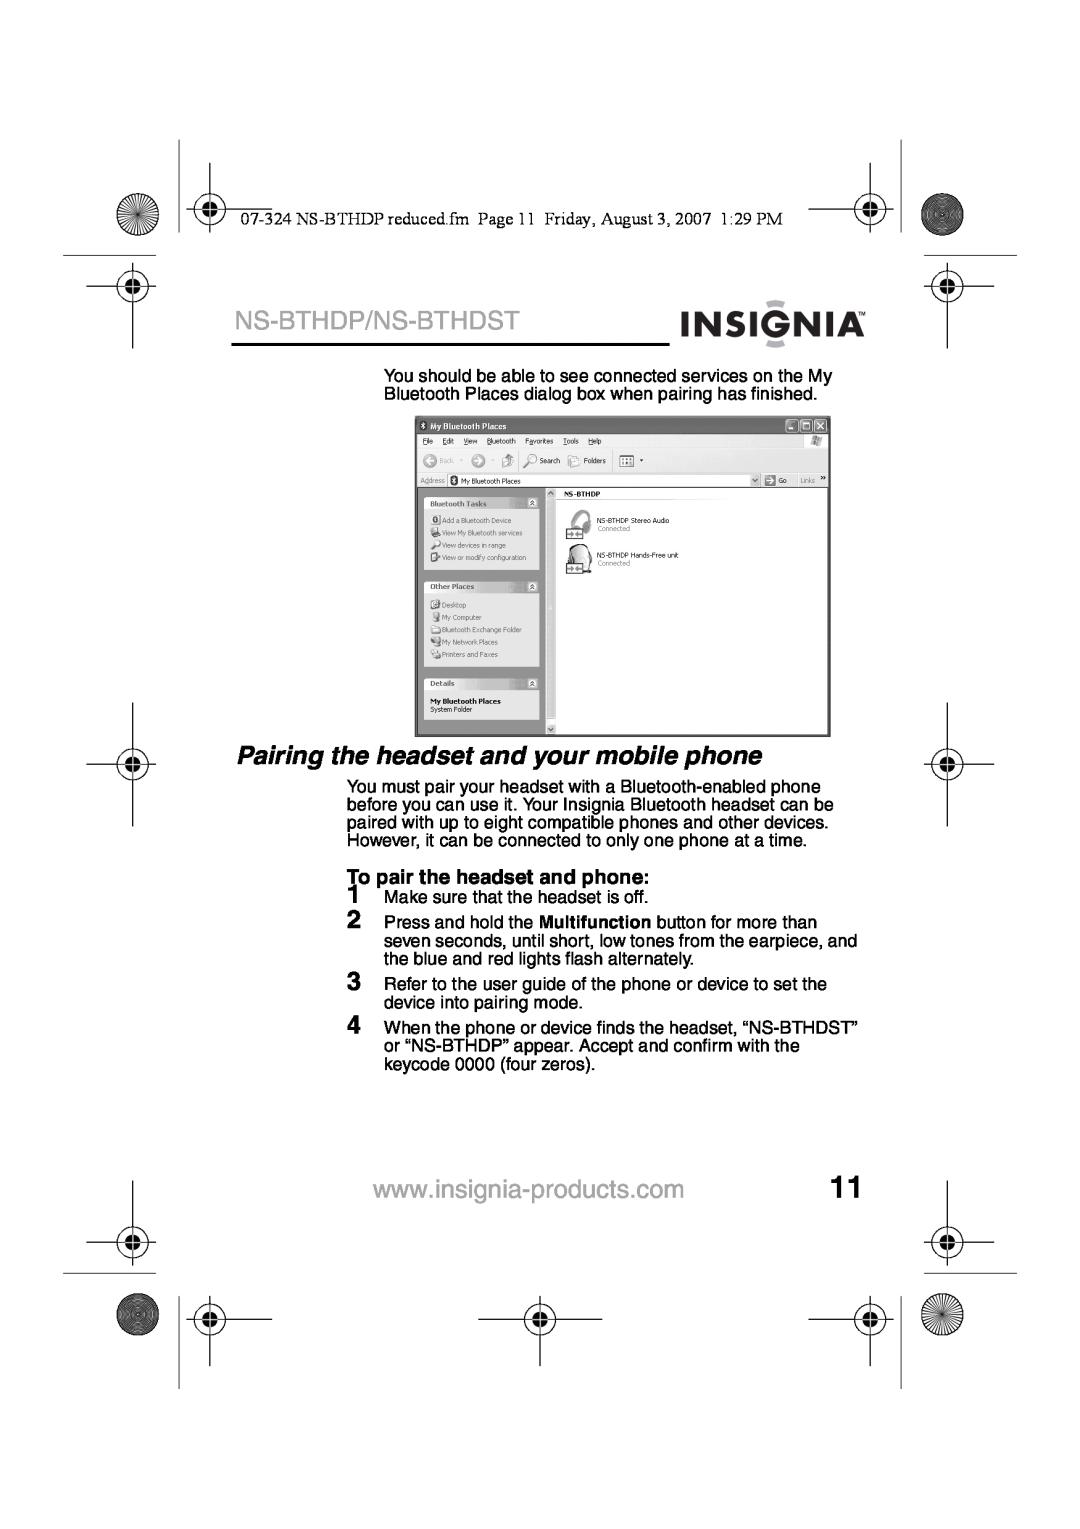 Insignia NS-BTHDST manual Pairing the headset and your mobile phone, Ns-Bthdp/Ns-Bthdst, To pair the headset and phone 